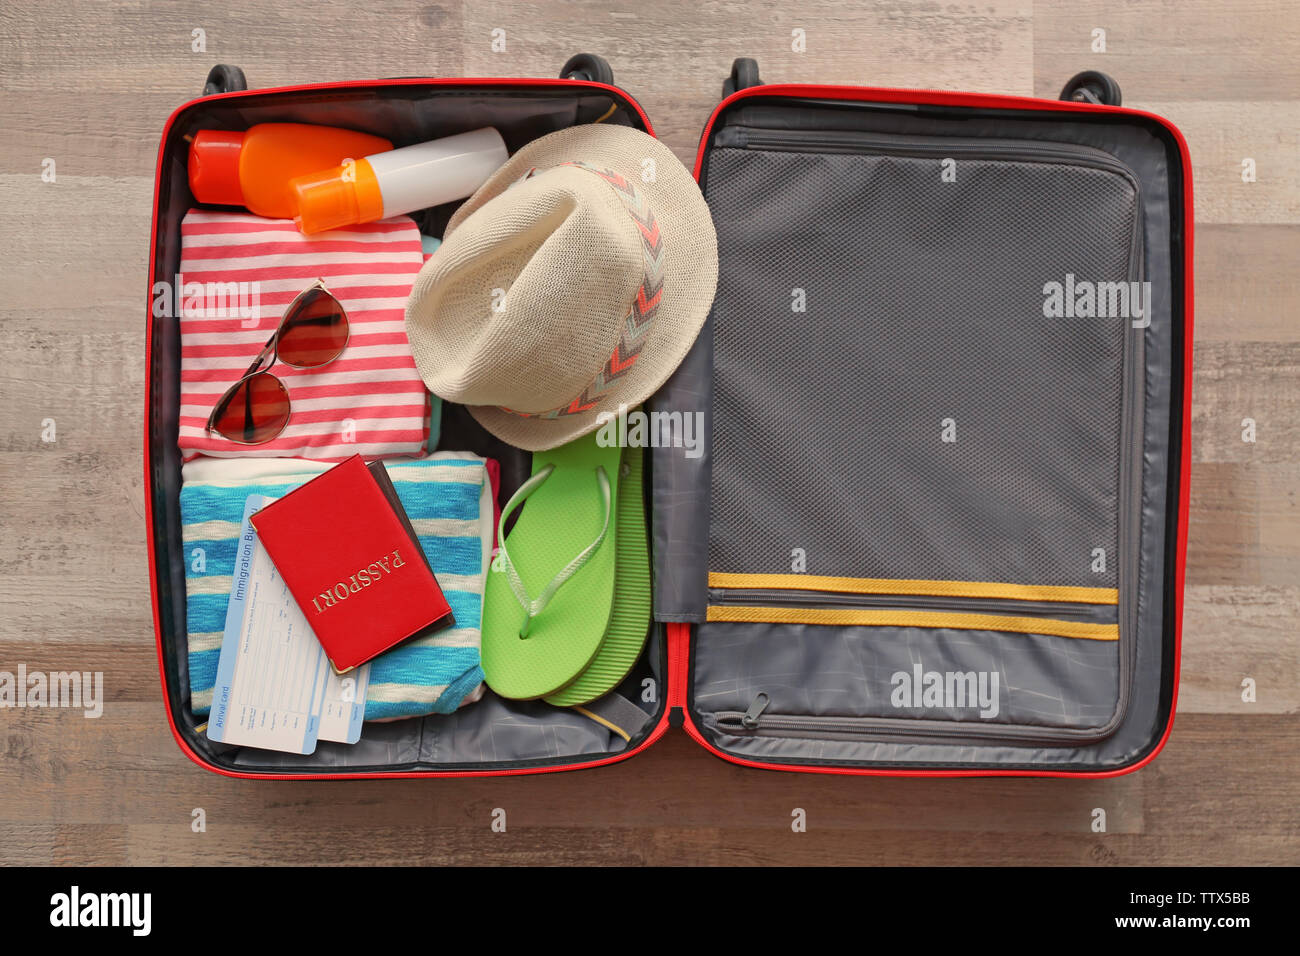 Open suitcase packed for travelling, close up Stock Photo